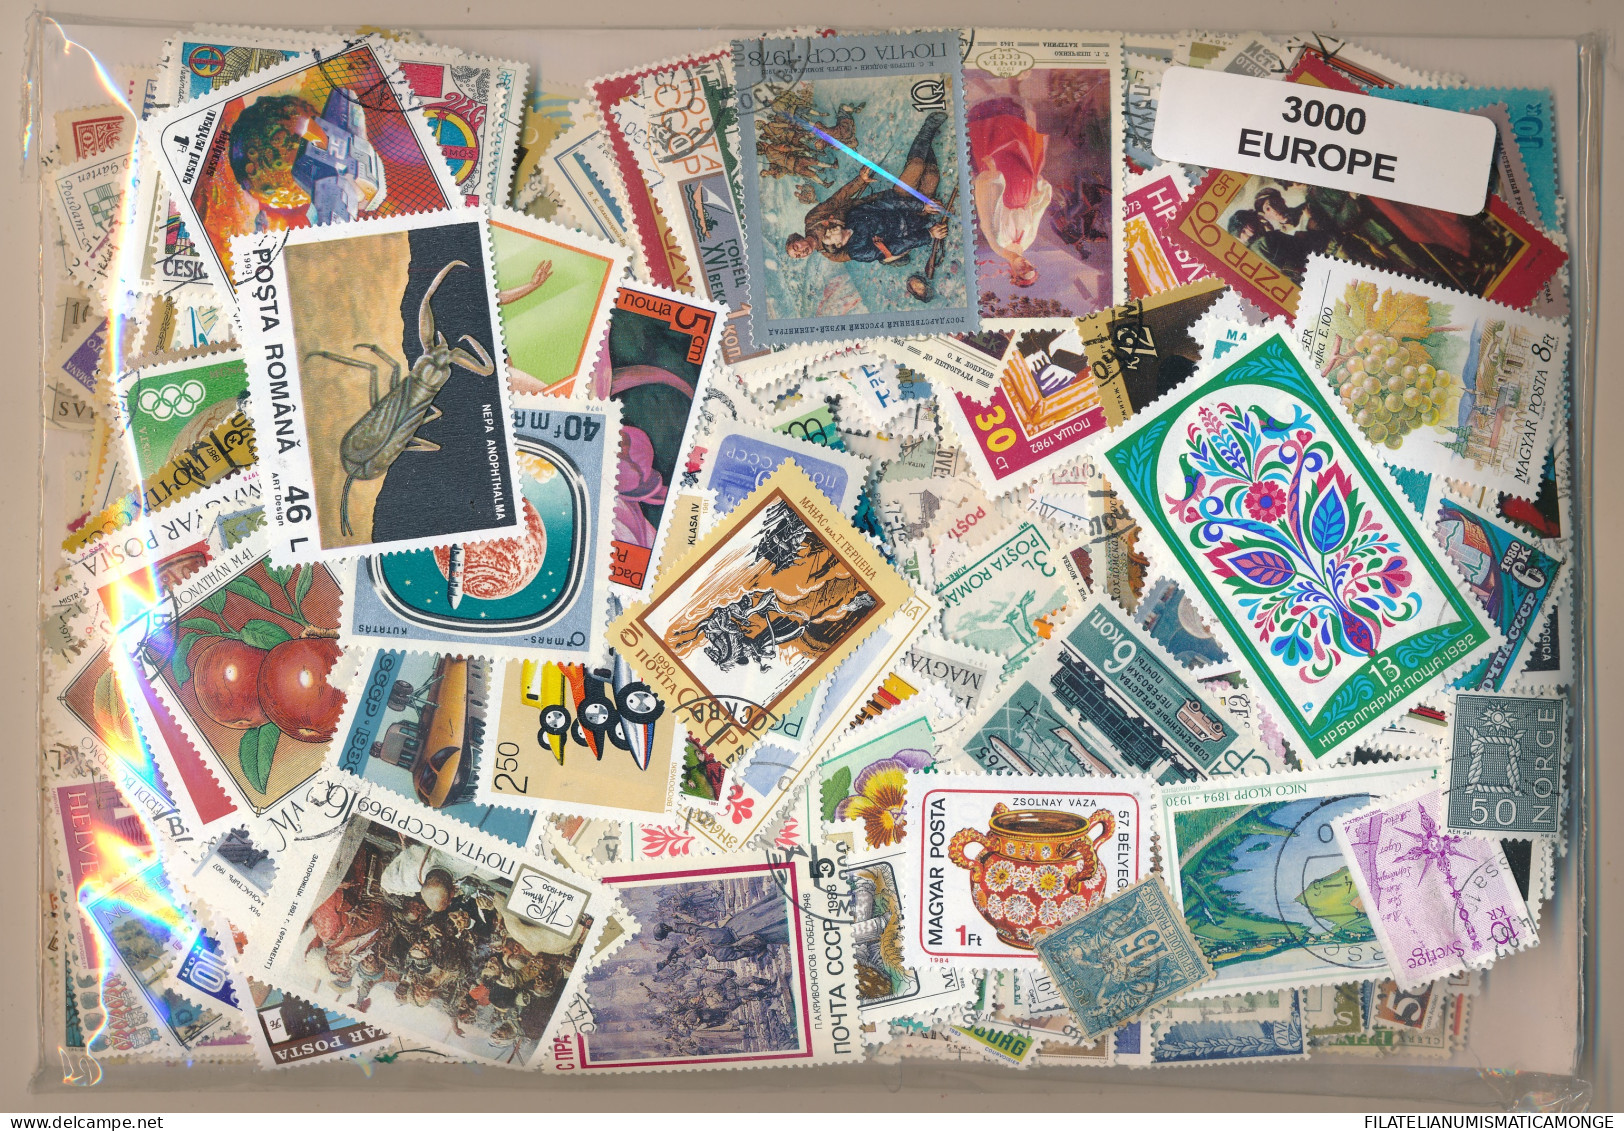  Offer - Lot Stamps - Paqueteria  Paises Europeos 3000 Sellos Diferentes        - Vrac (min 1000 Timbres)